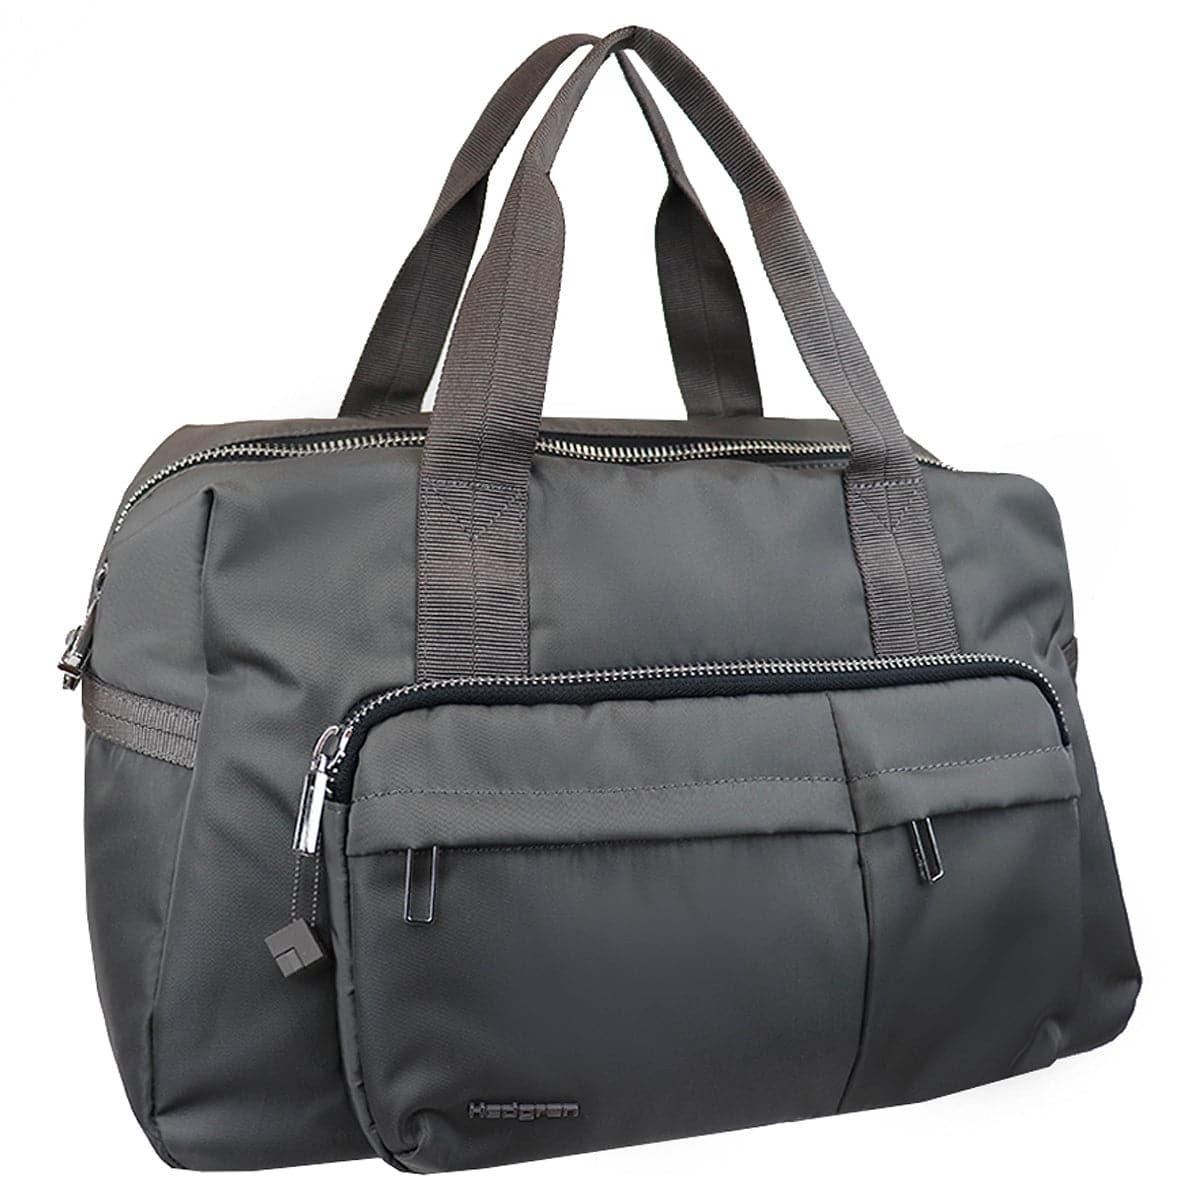 Hedgren Micaela Sustainably Made Duffel Bag